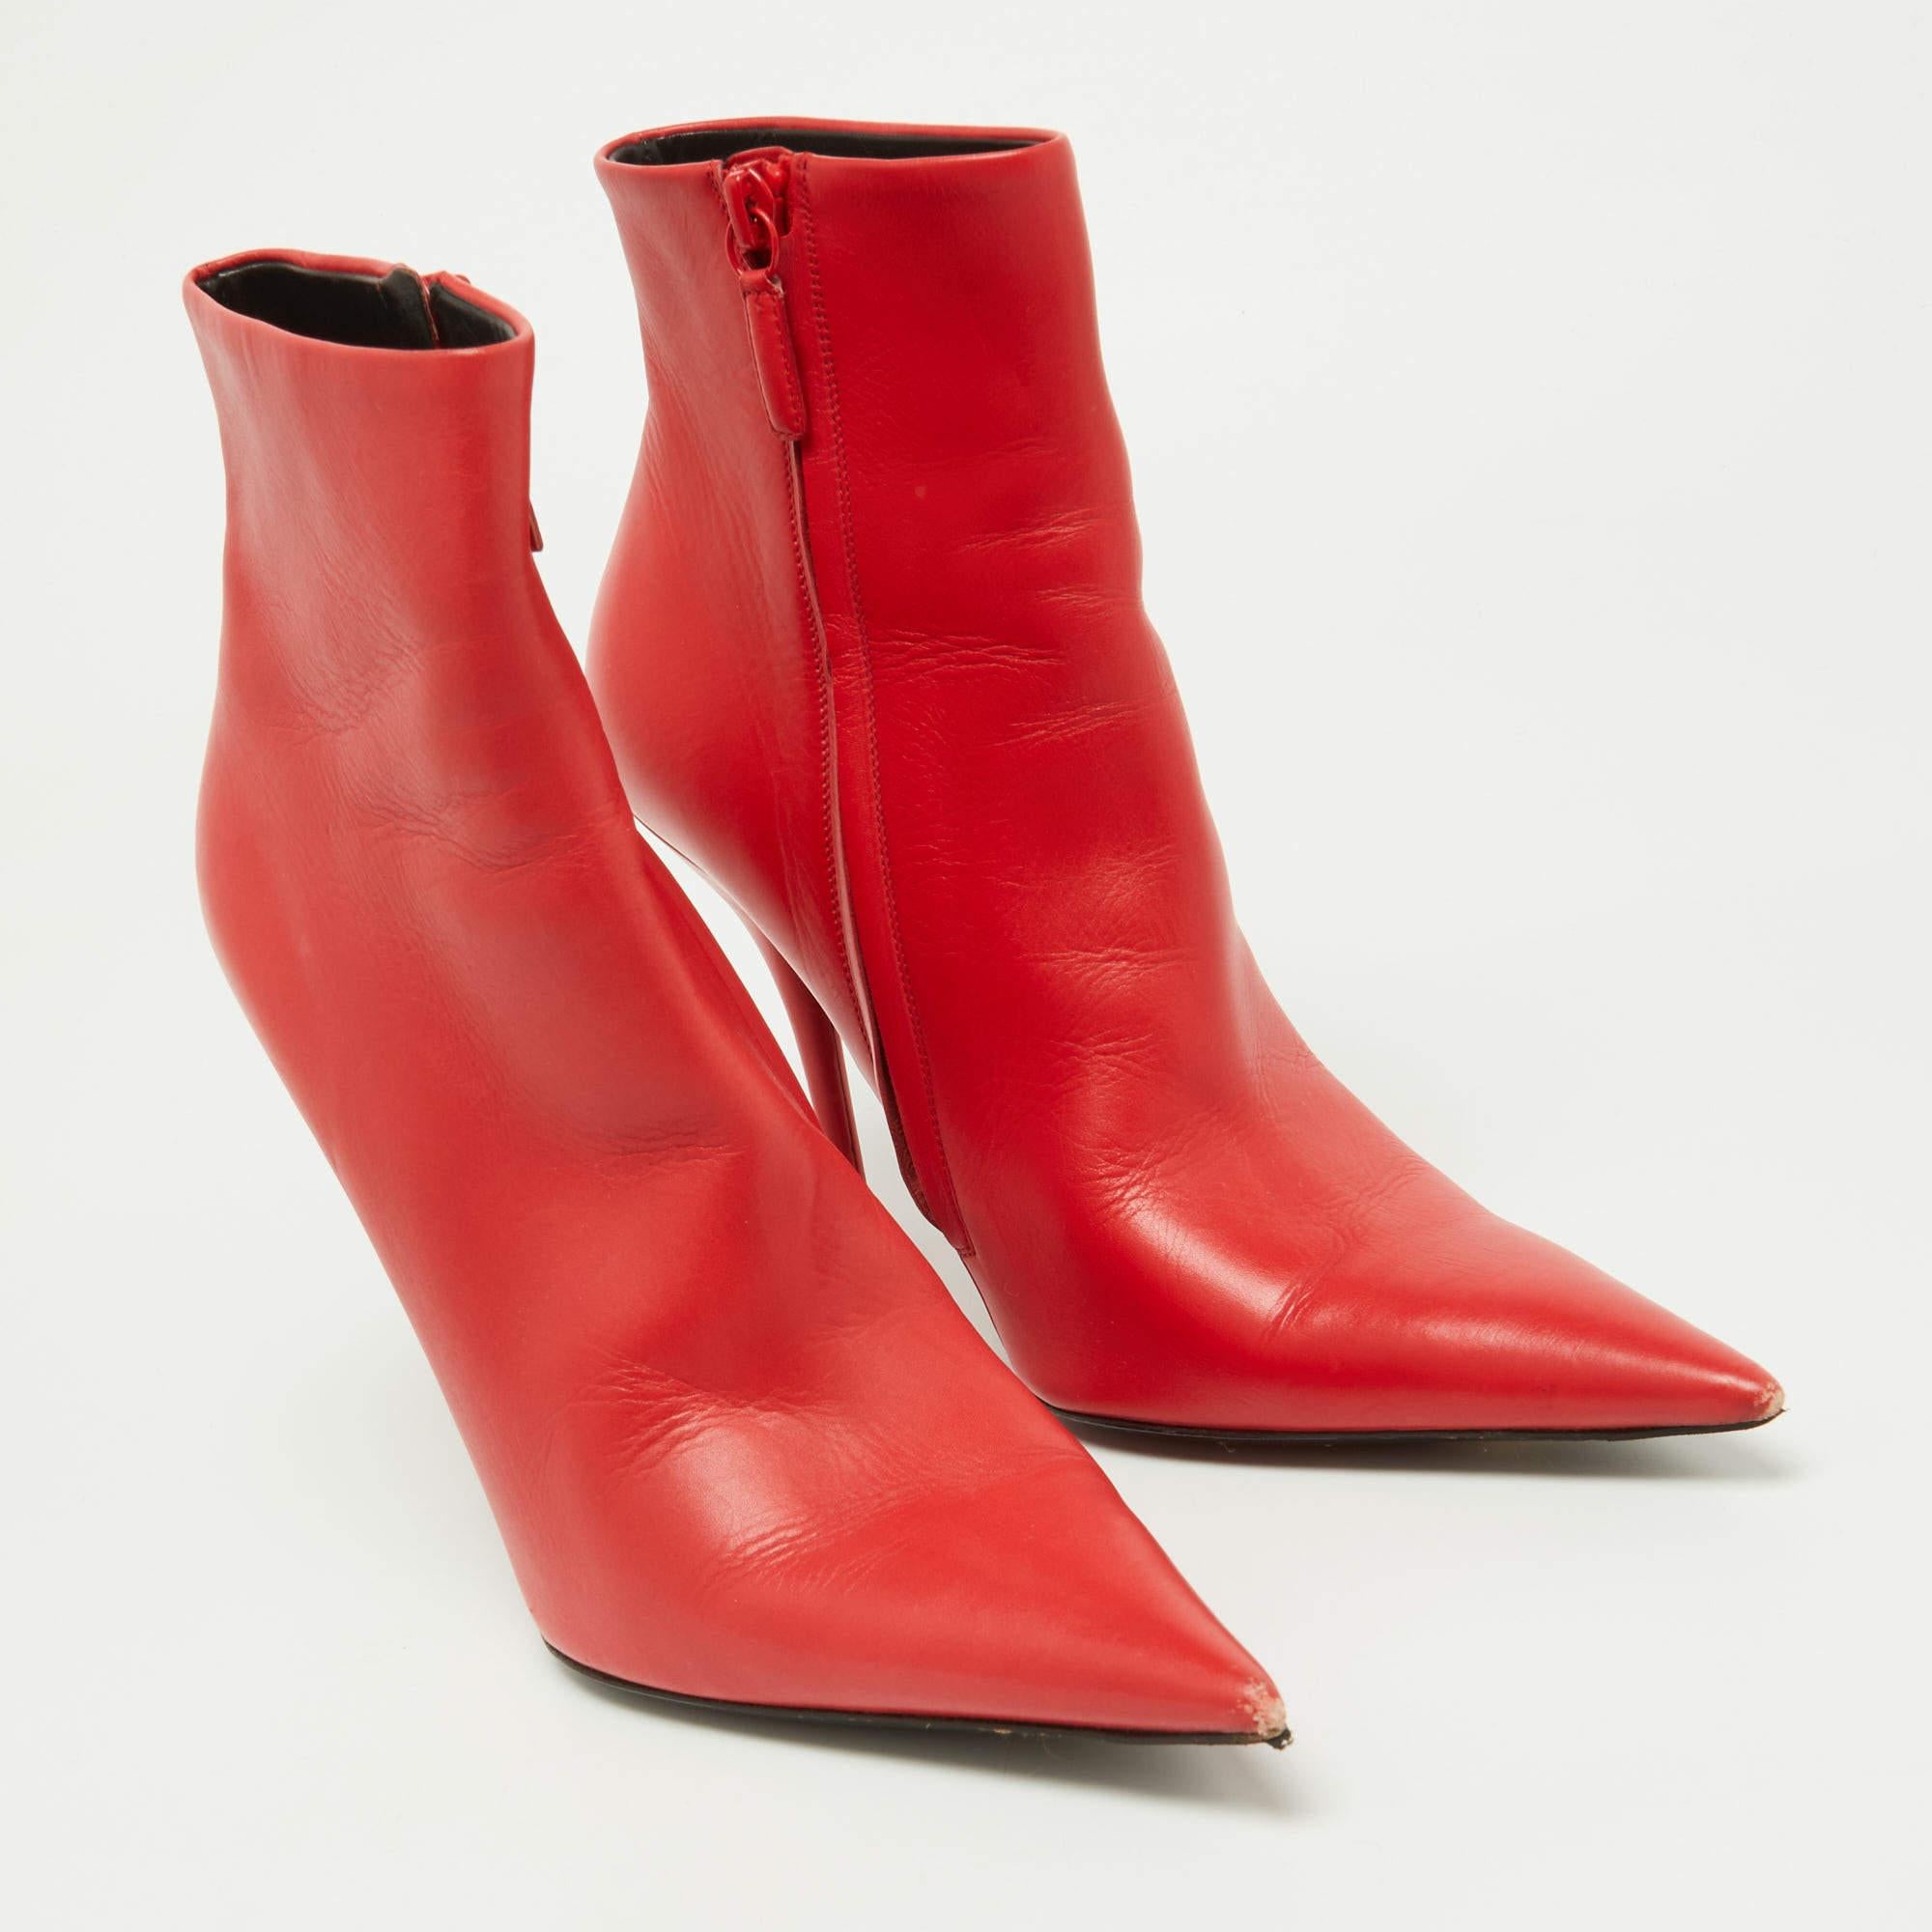 Balenciaga Red Leather Knife Ankle Booties Size 38.5 In Good Condition For Sale In Dubai, Al Qouz 2